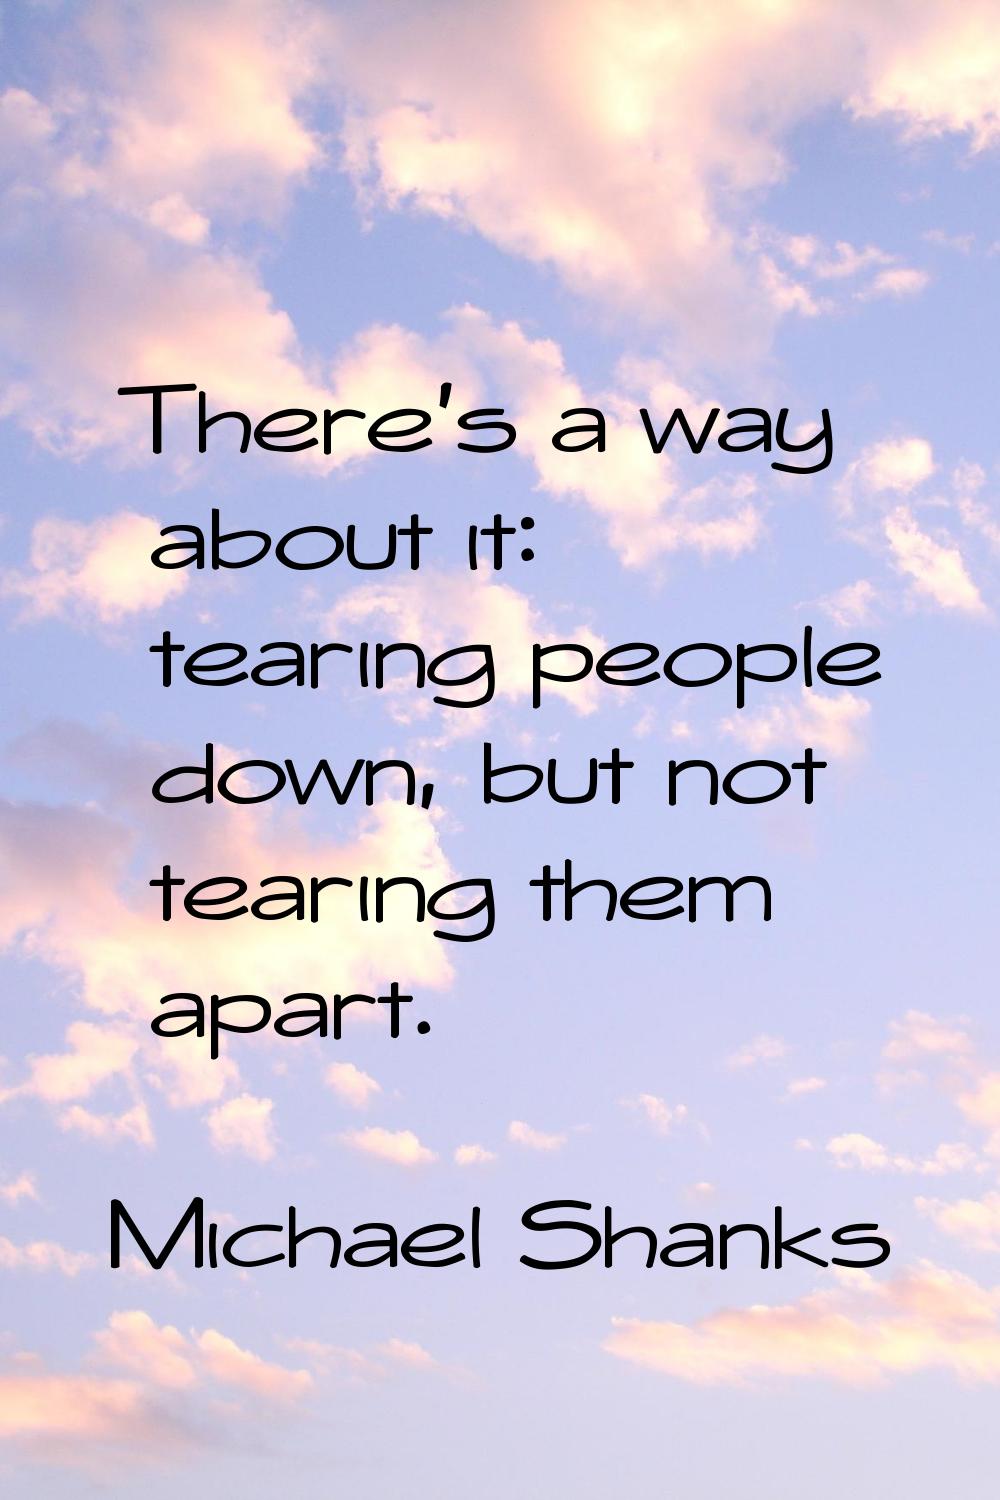 There's a way about it: tearing people down, but not tearing them apart.